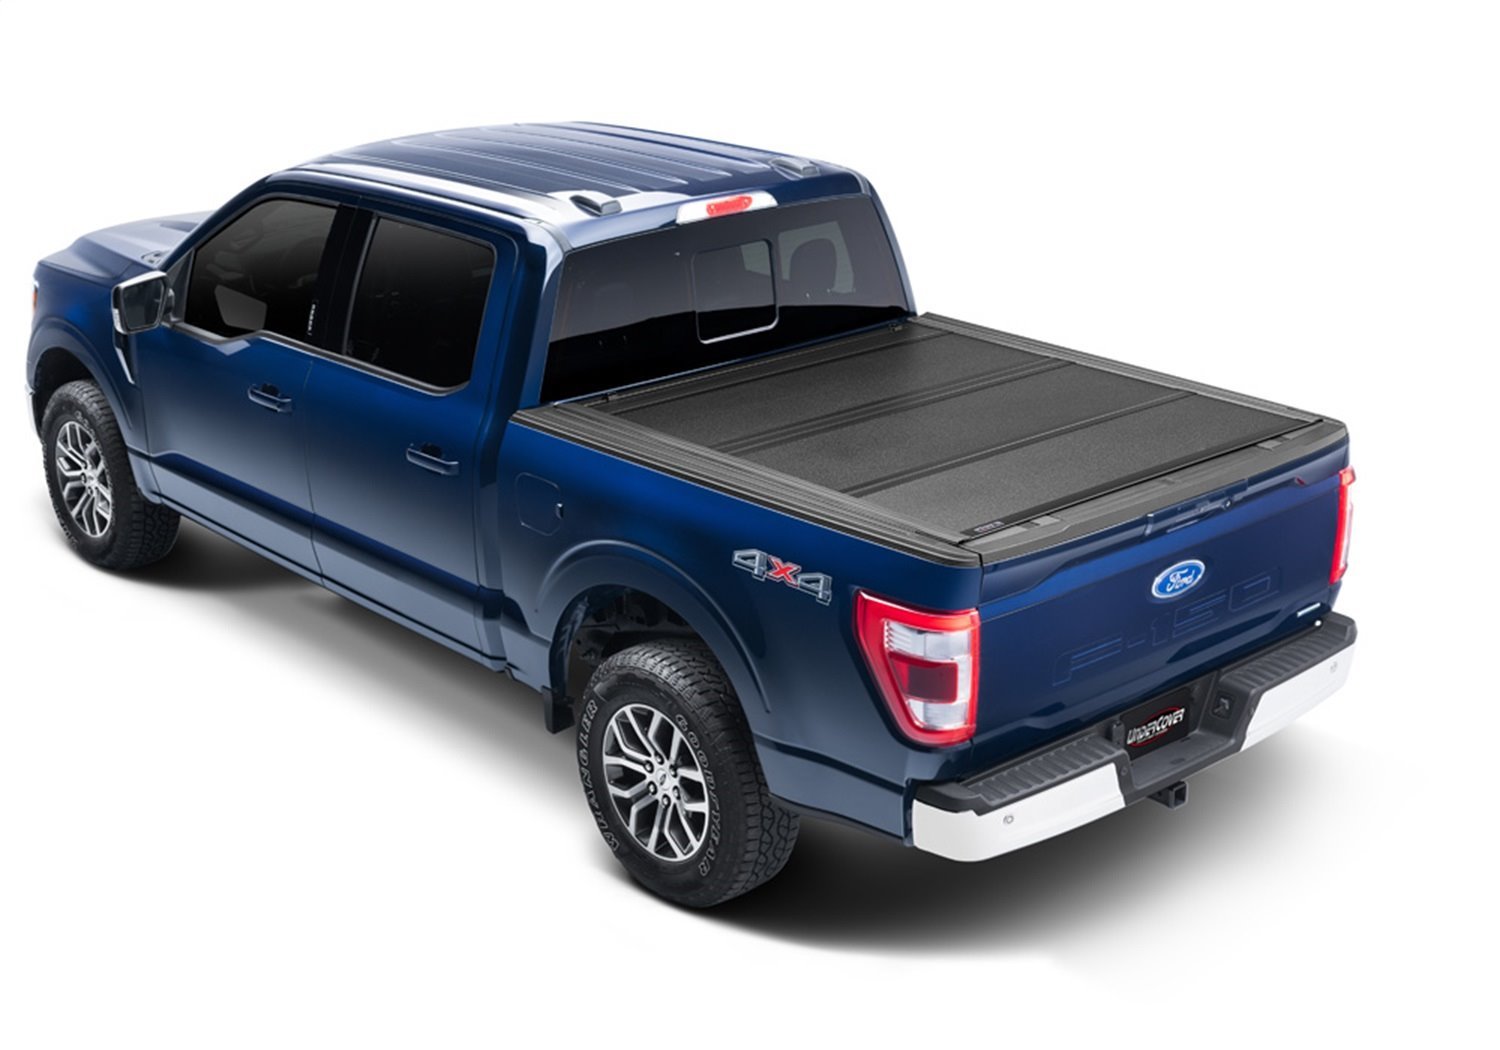 AX22030 Armor Flex Hard Folding Cover, Fits Select Ford F-150 6'7" Bed STD/EXT/Crew, Black Textured